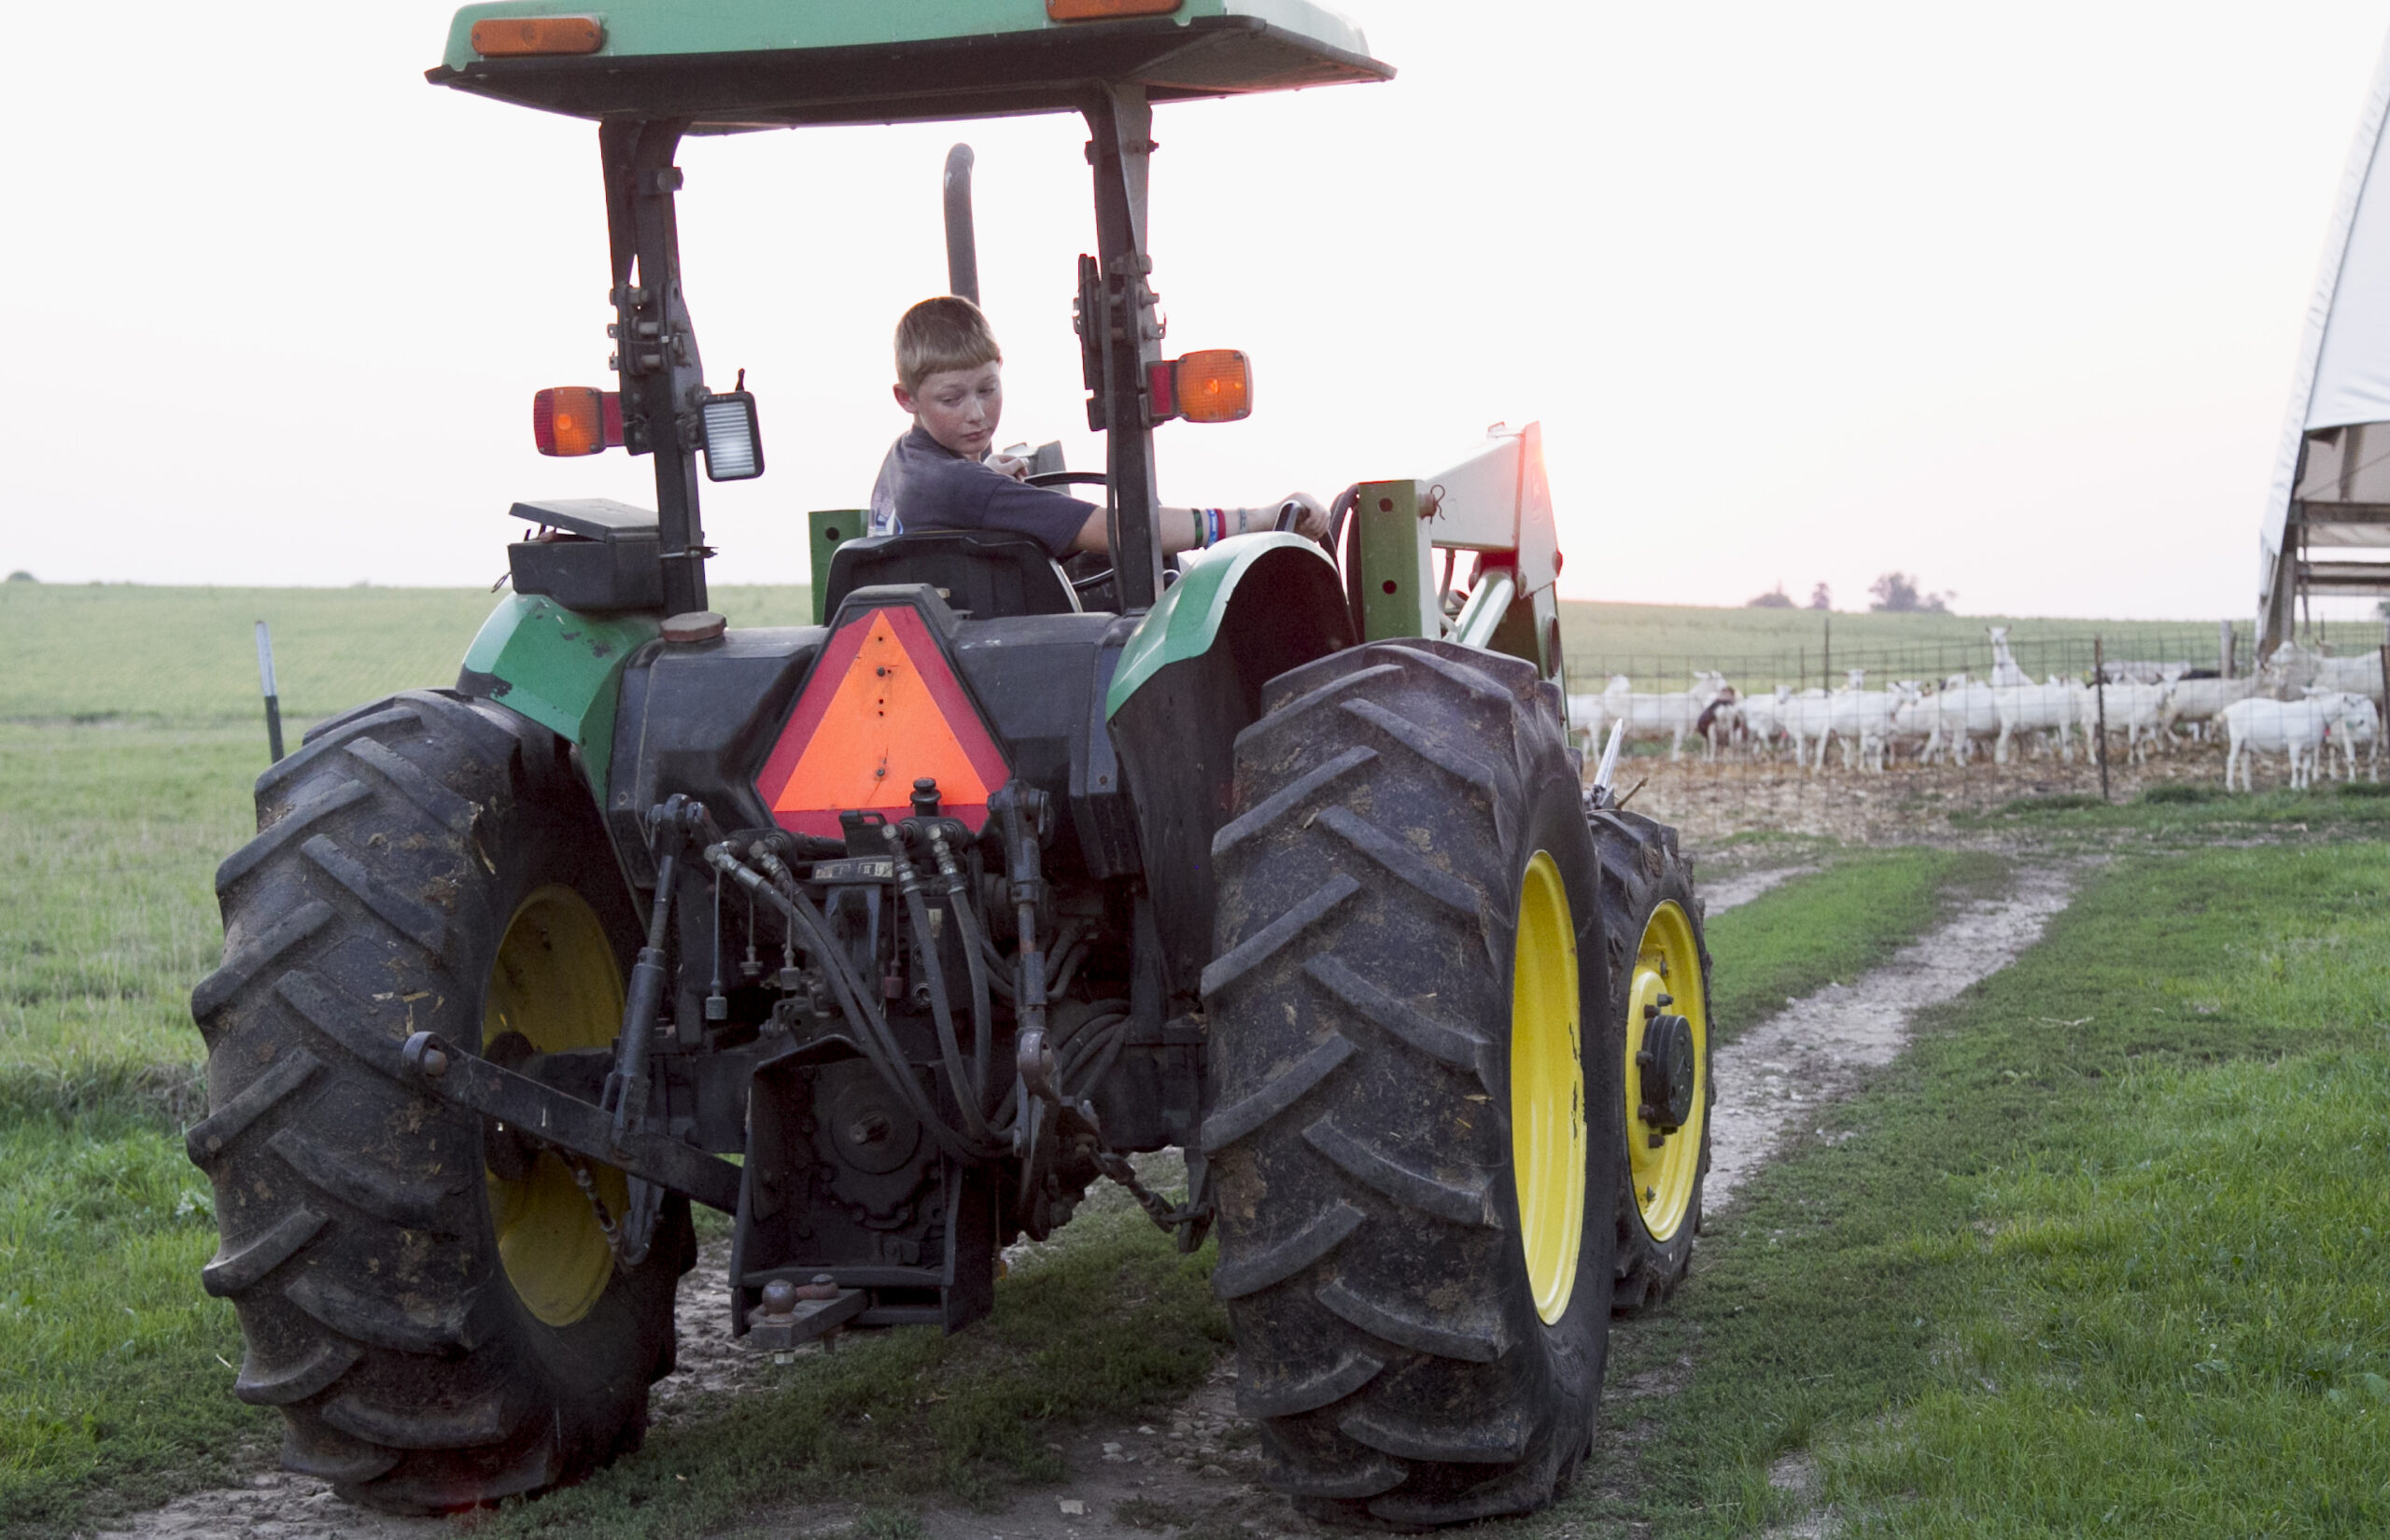 Farm safety experts say Wisconsin law may let youth operate tractors too early